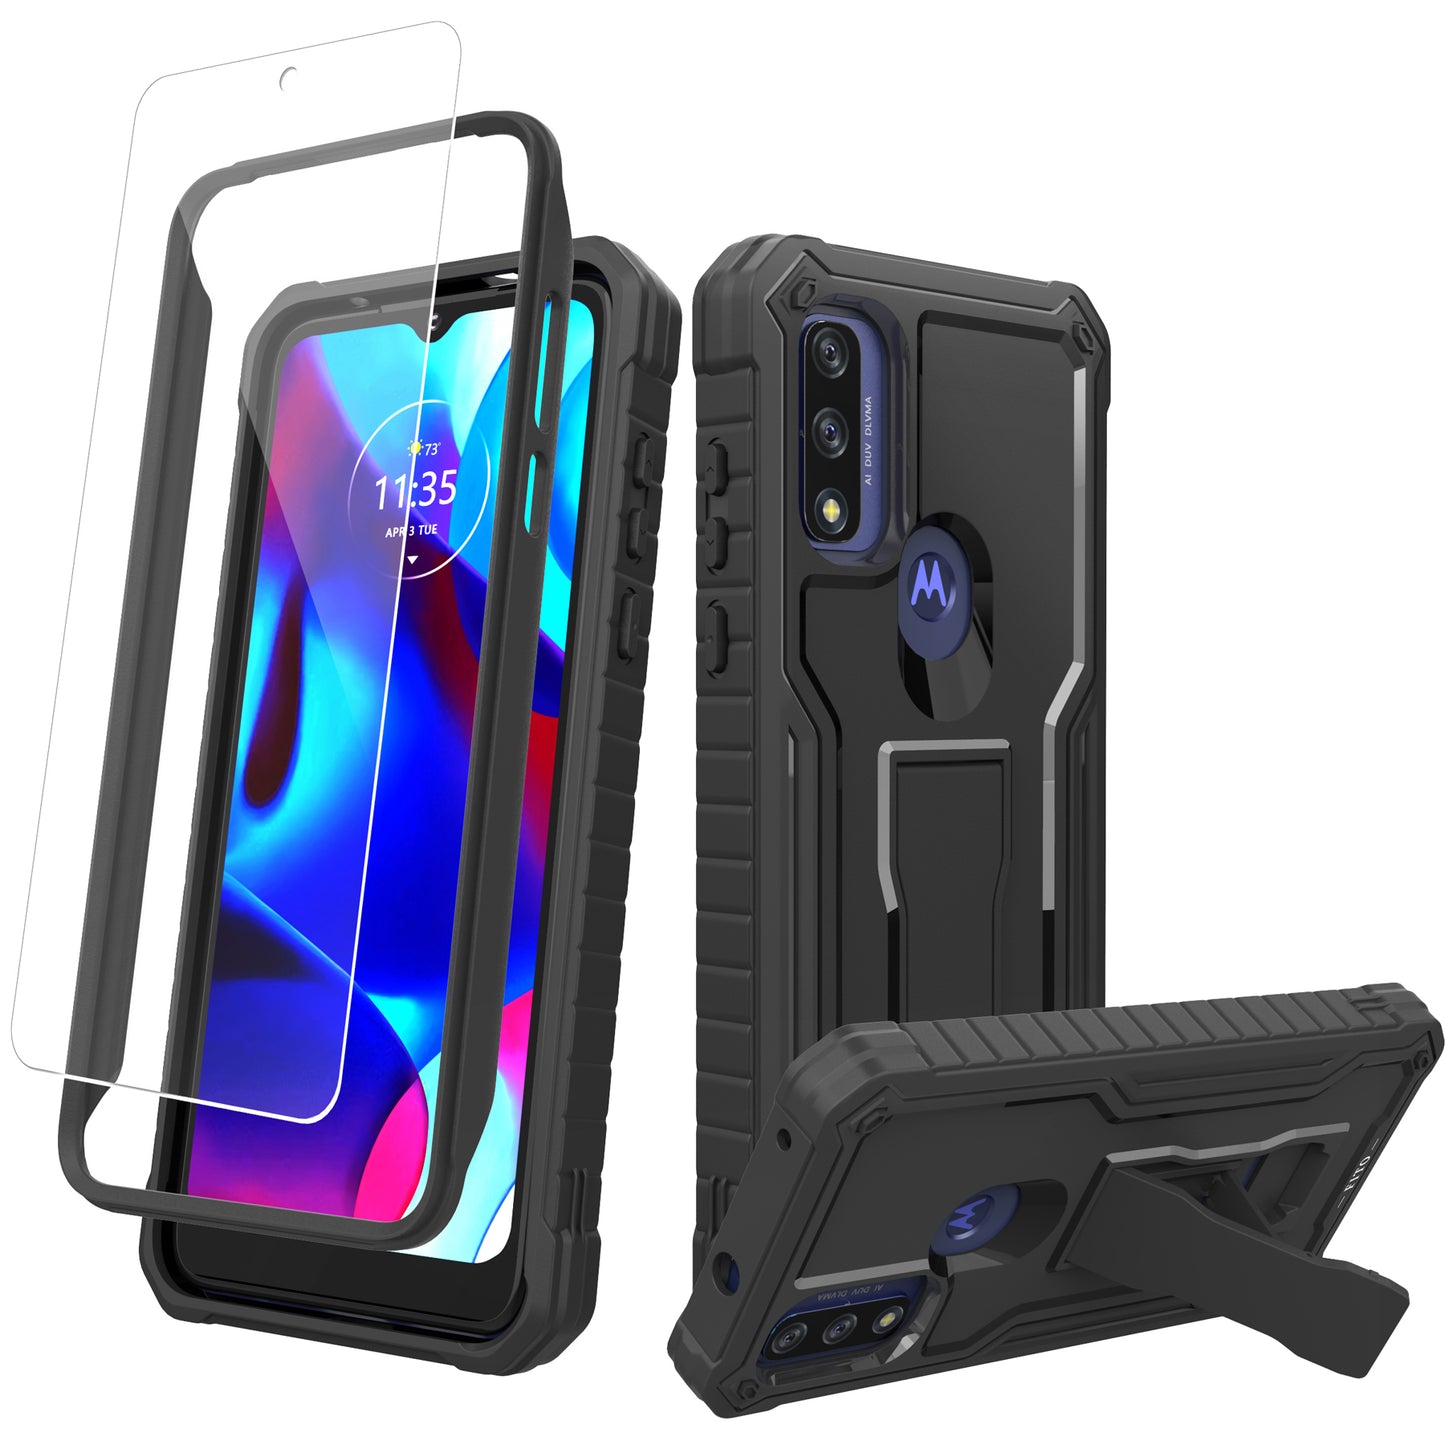 FITO for Moto G Pure Case, Dual Layer Shockproof Heavy Duty Case with a Glass Screen Protector, Built-in Kickstand